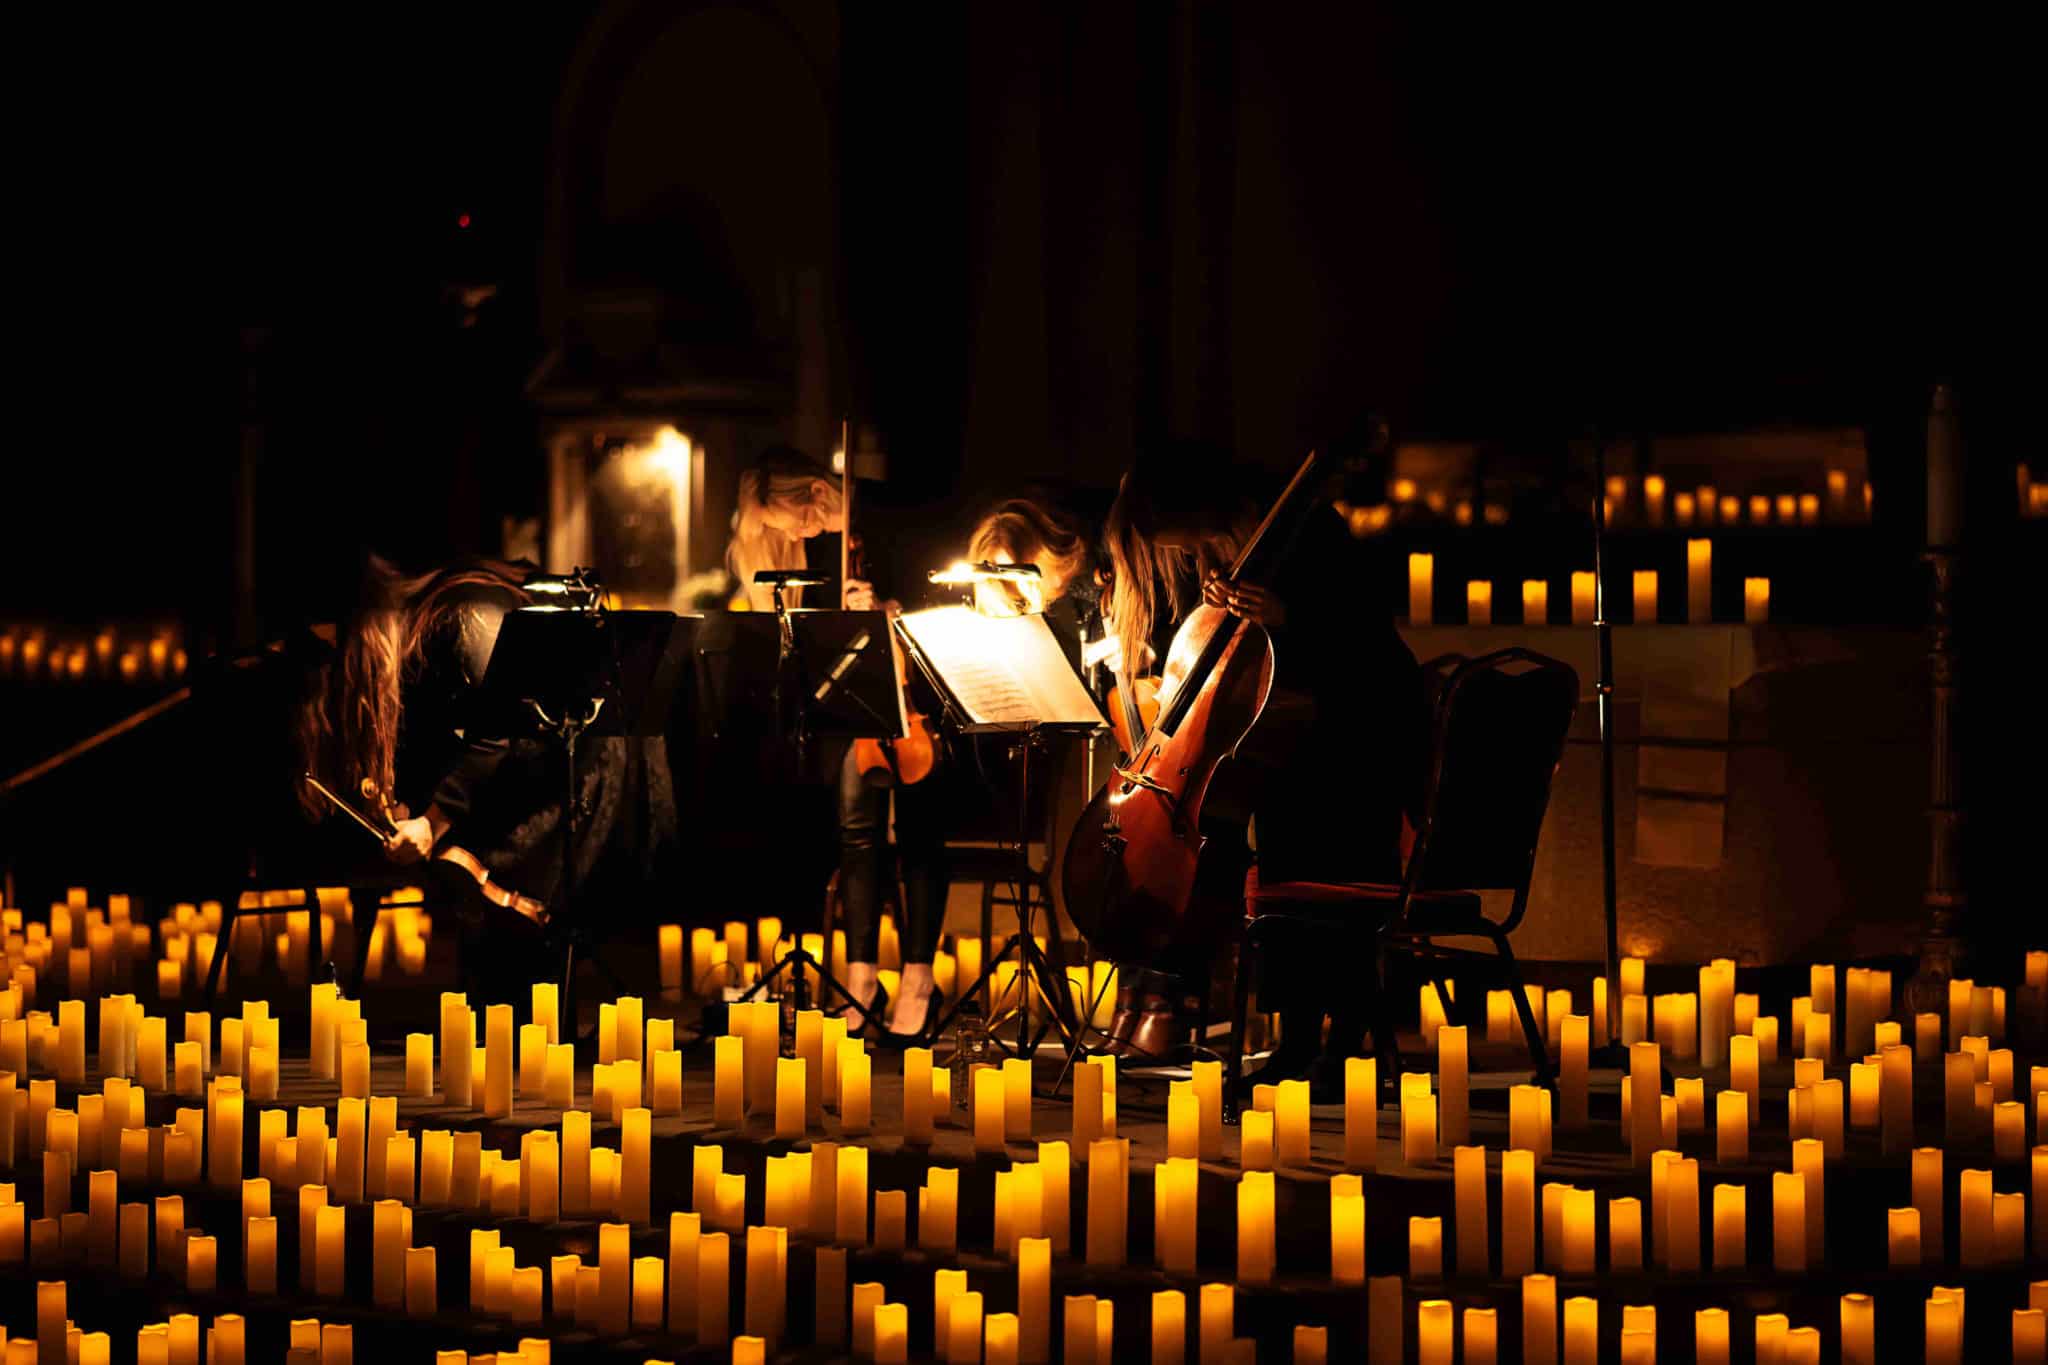 A string quartet play, surrounded by candles in Dublin.